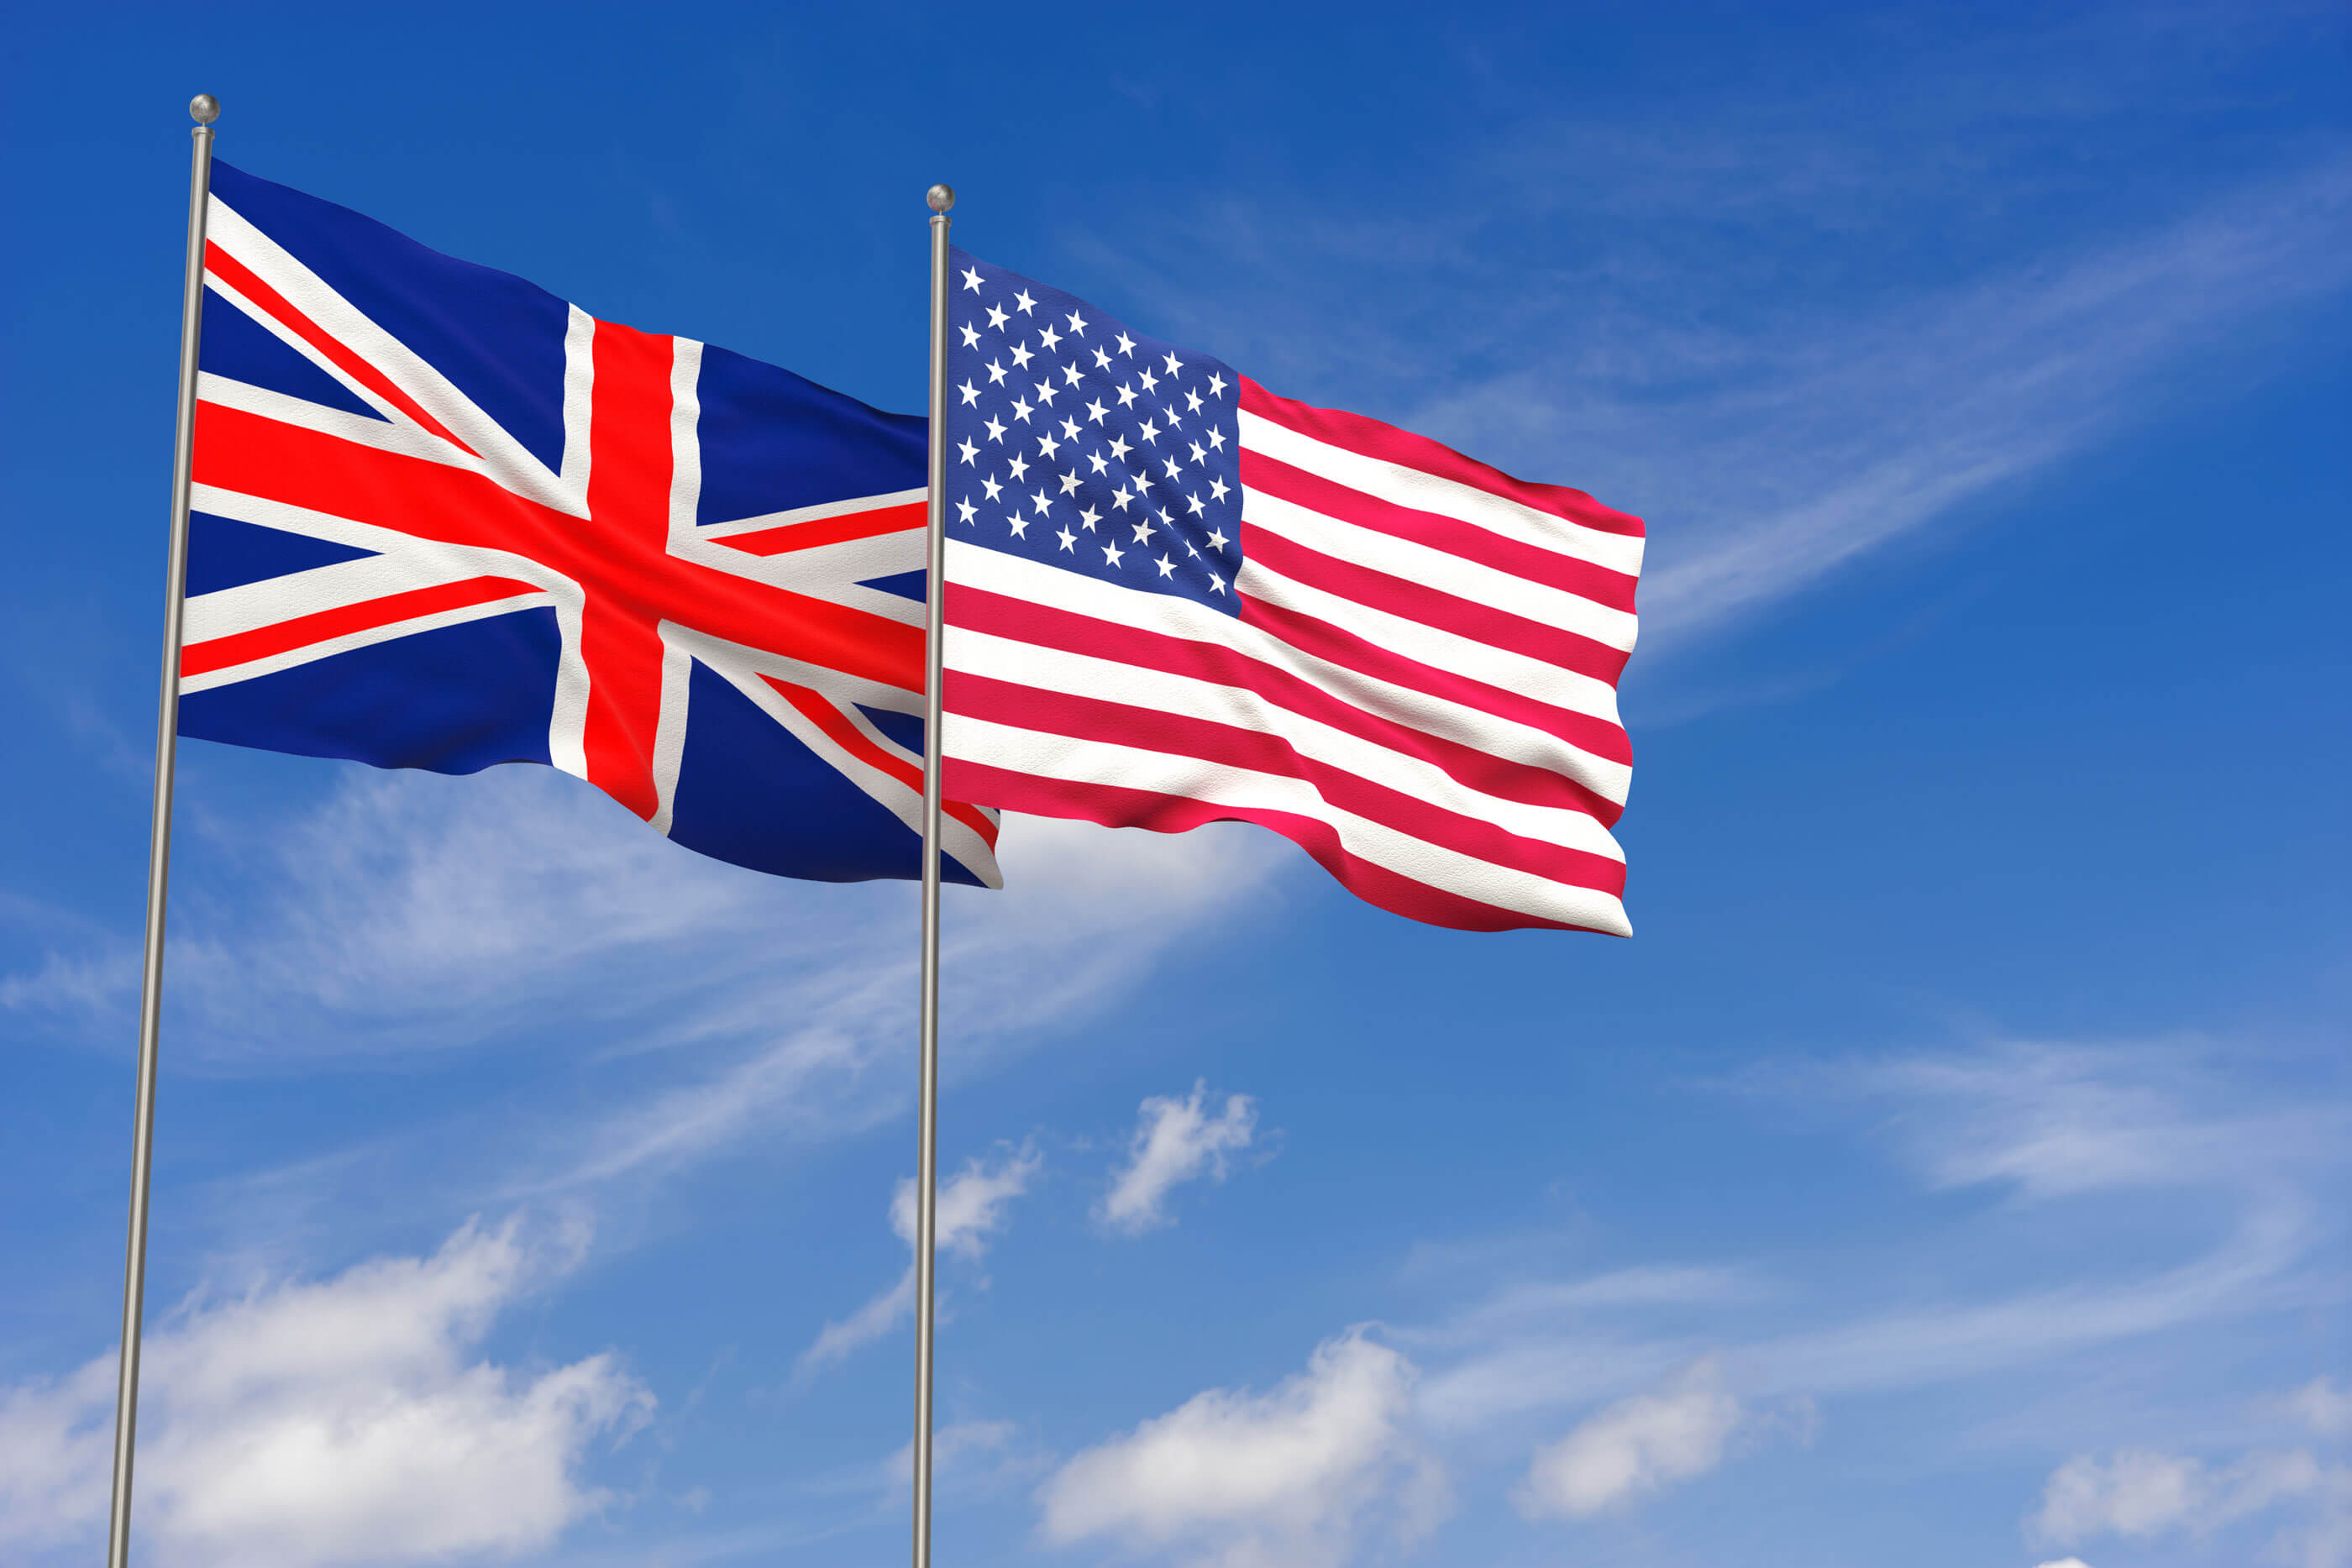 The US and UK agree to reciprocal architect licensing.